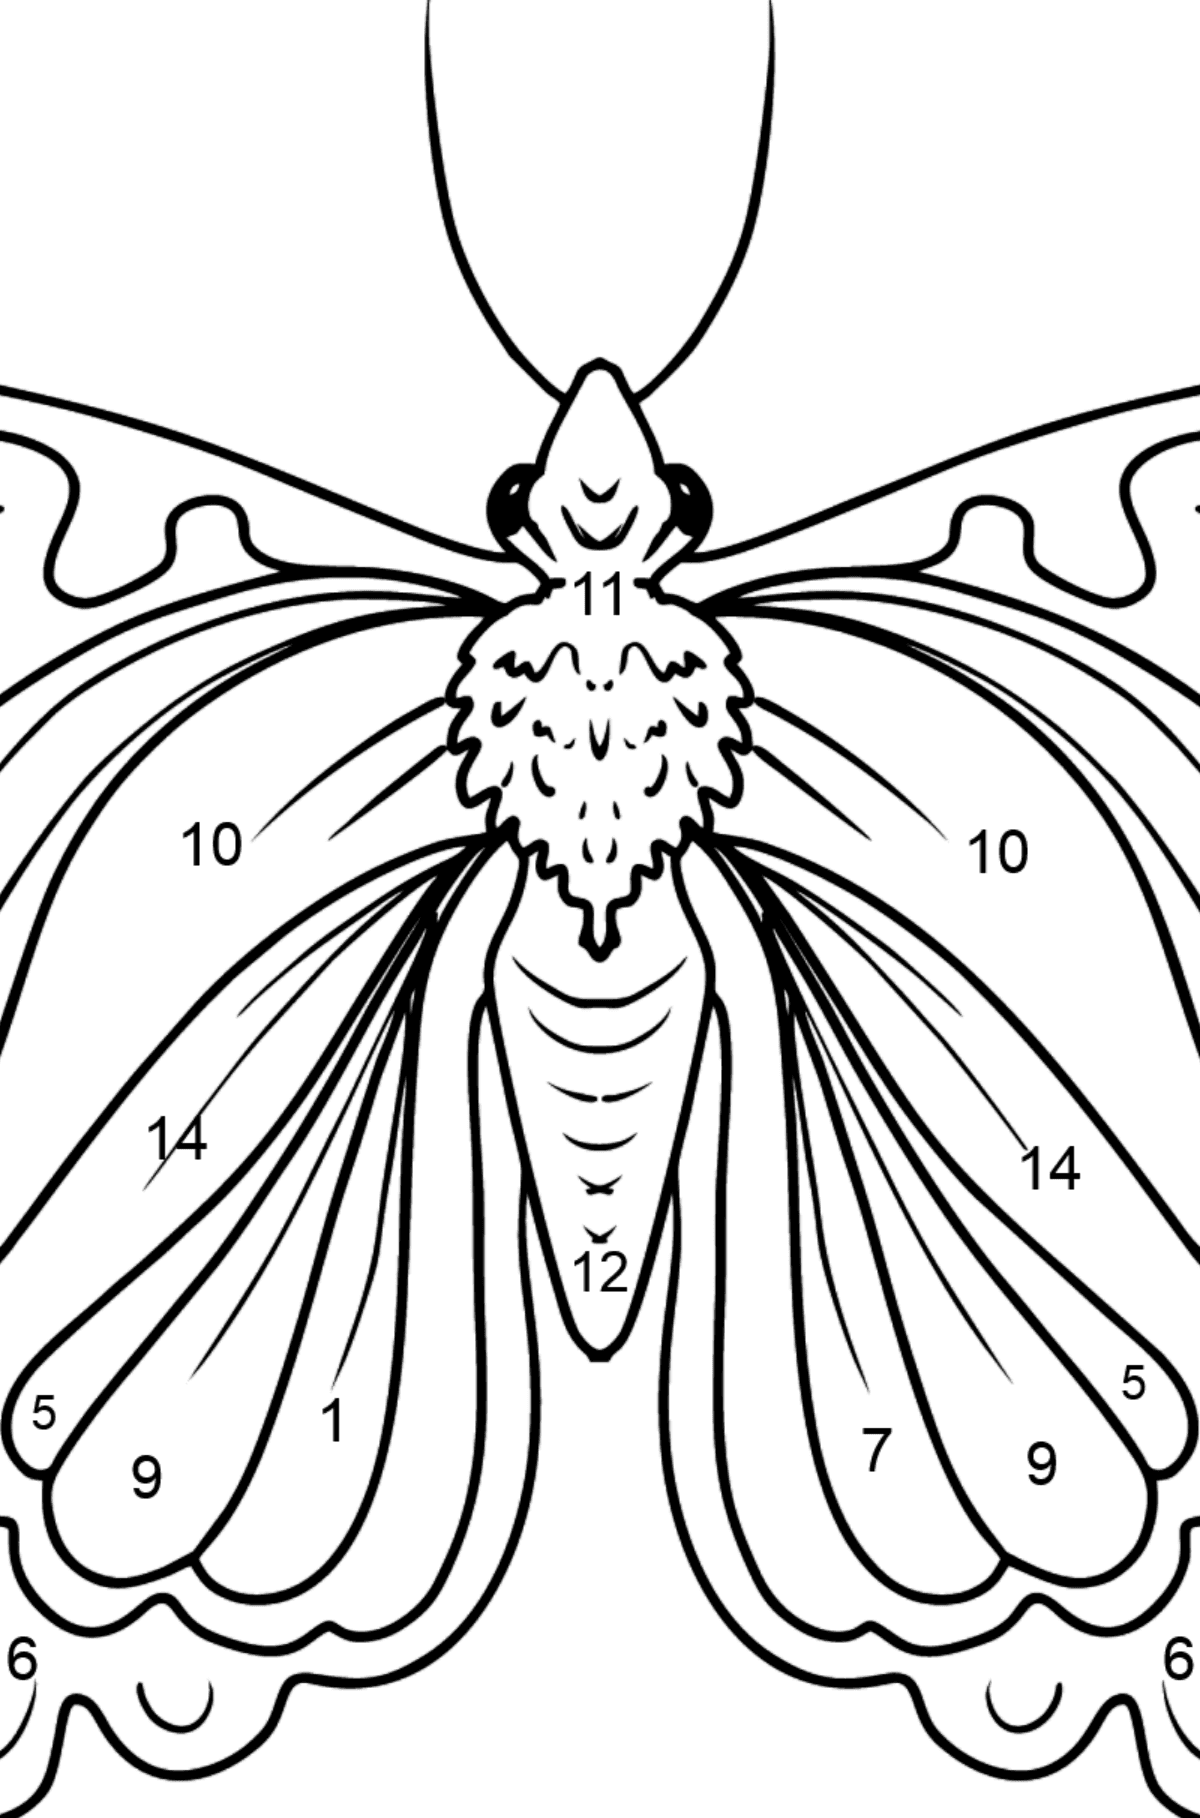 Cute Butterfly coloring page - Coloring by Numbers for Kids